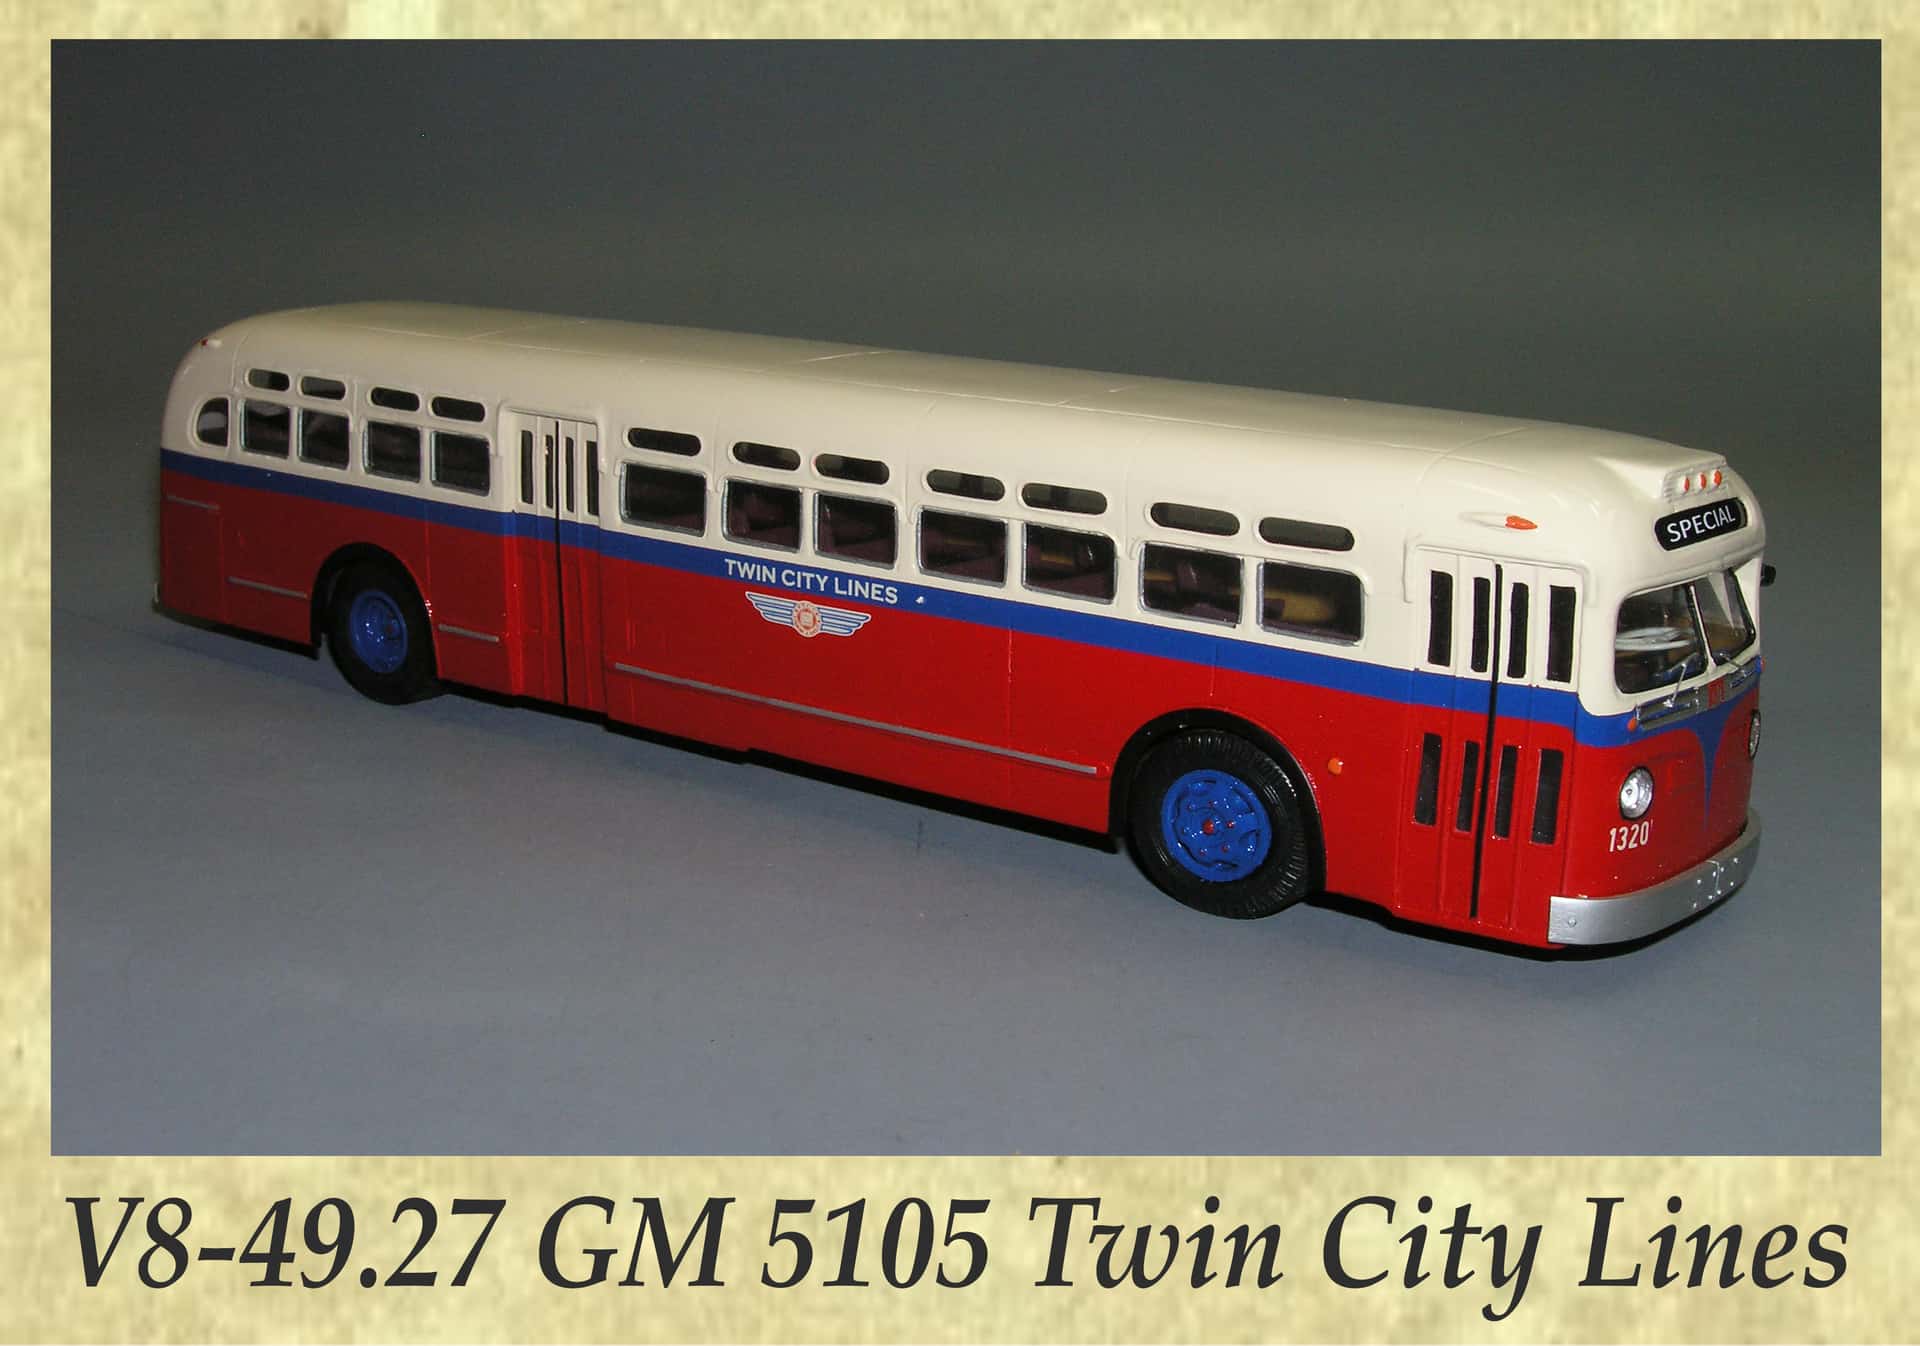 V8-49.27 GM 5105 Twin City Lines